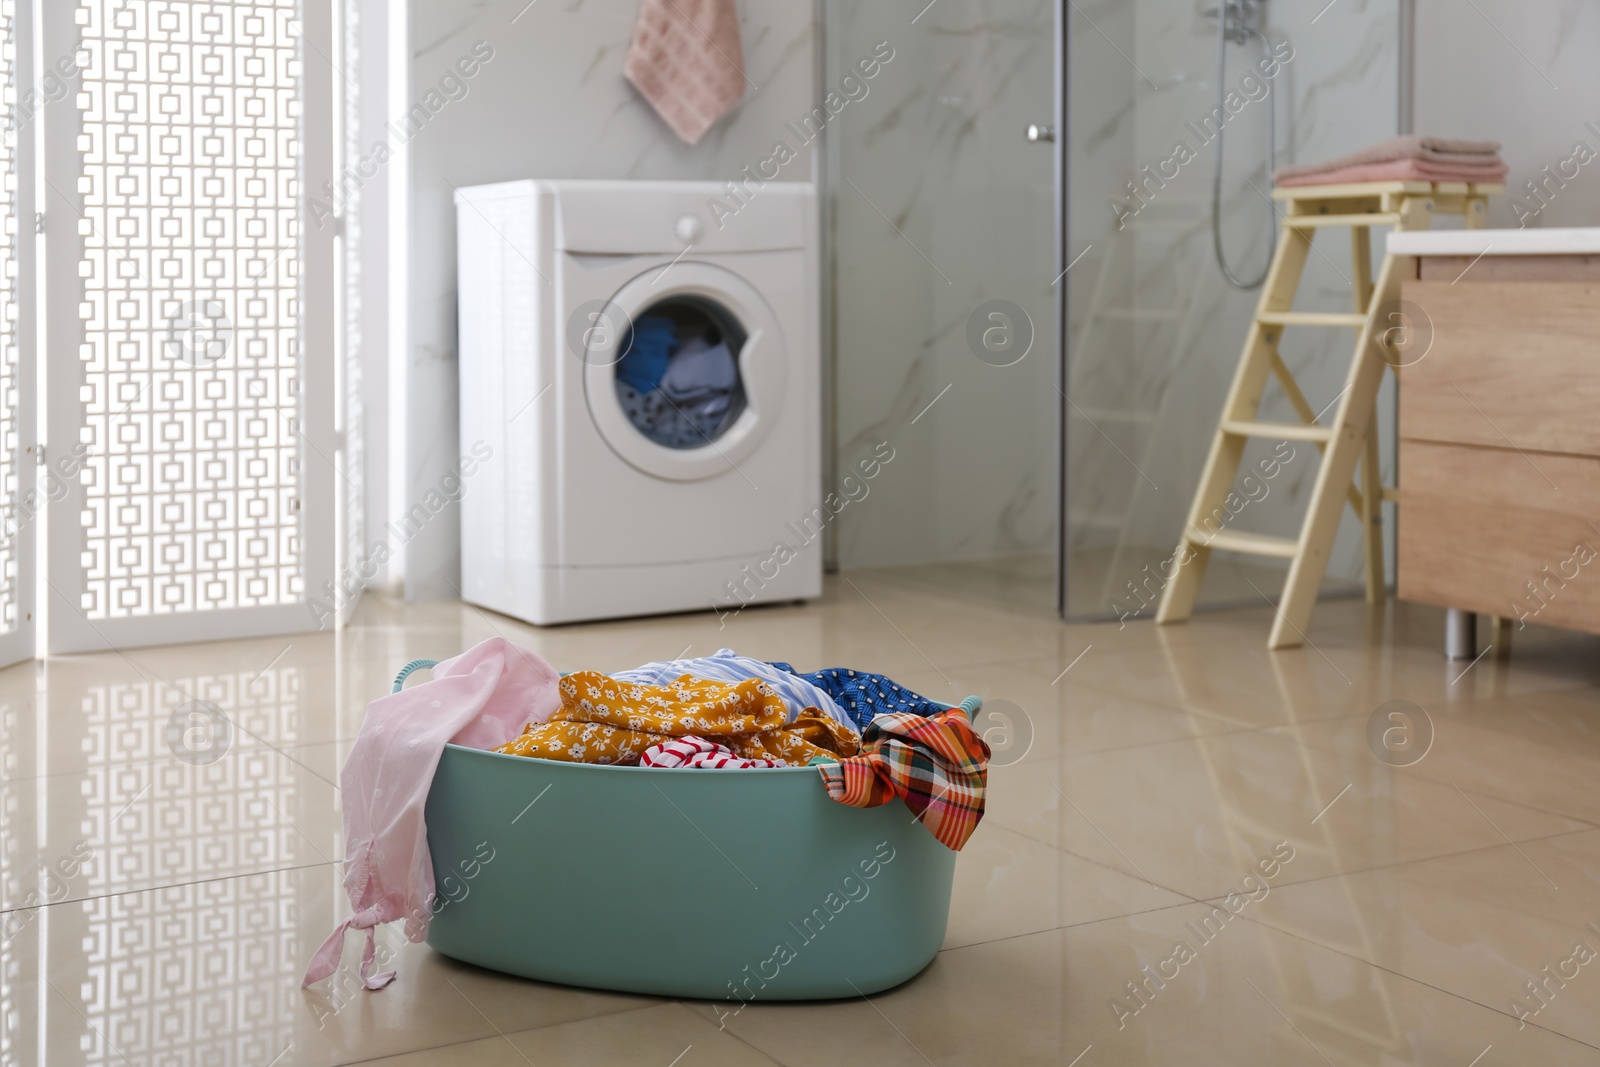 Photo of Plastic laundry basket full of different clothes on floor in bathroom